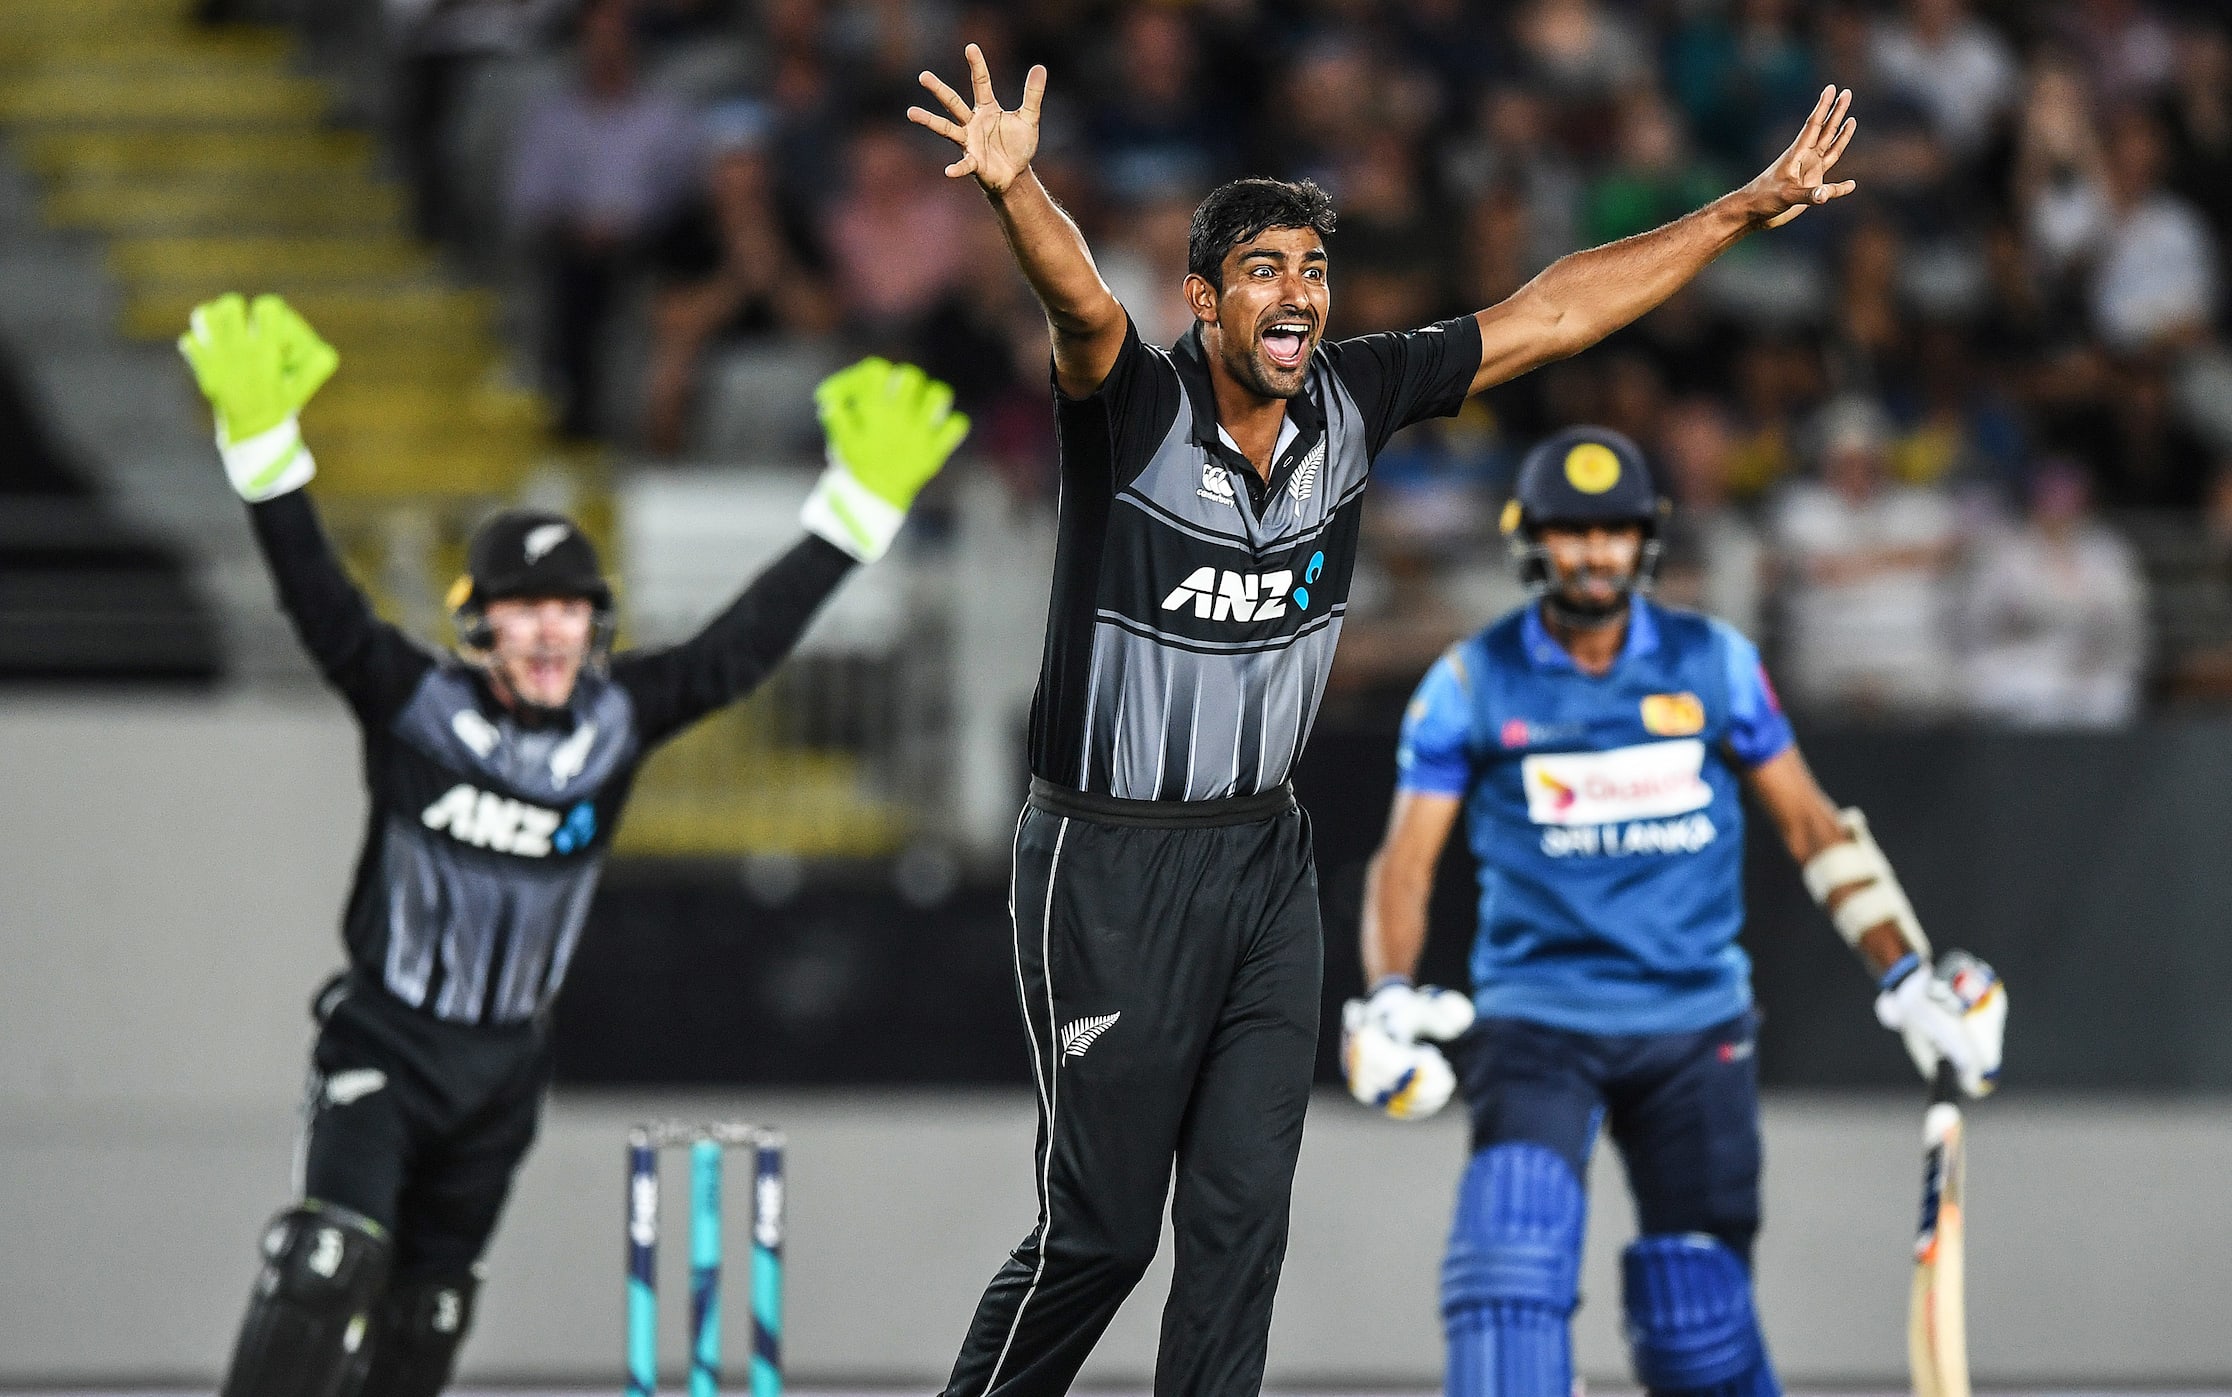 New Zealand leg spin bowler Ish Sodhi appeals successfully for a LBW decision to dismiss Dasun Shanaka.